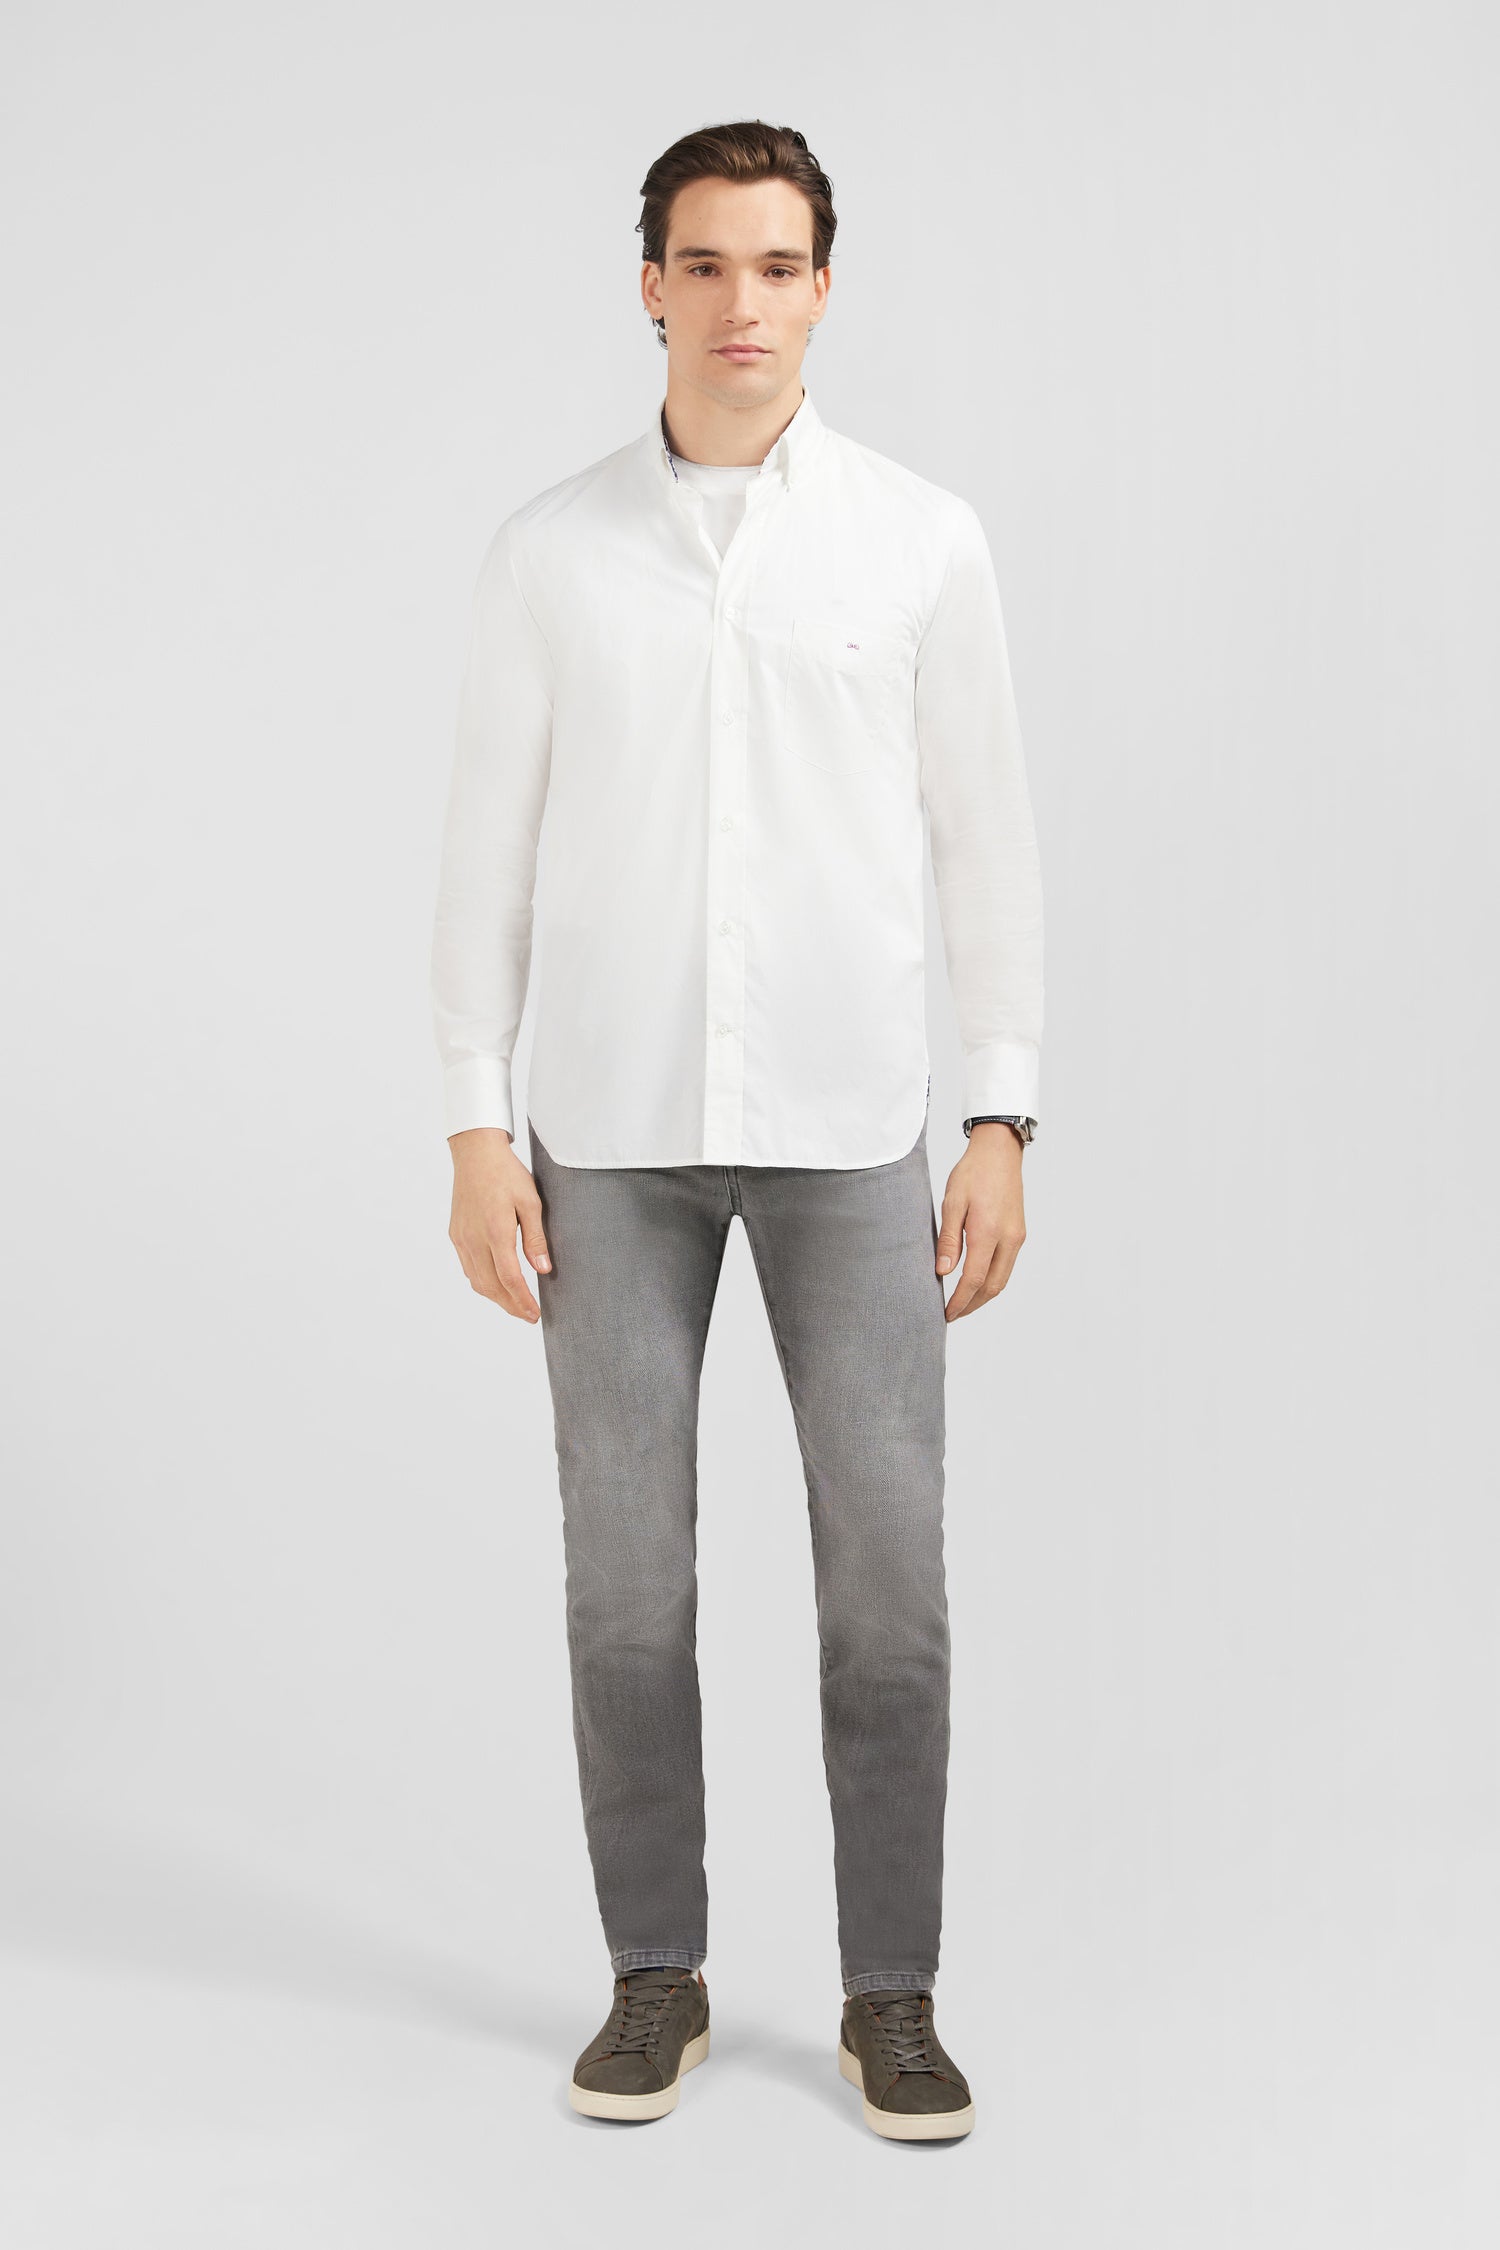 White shirt with floral elbow patches